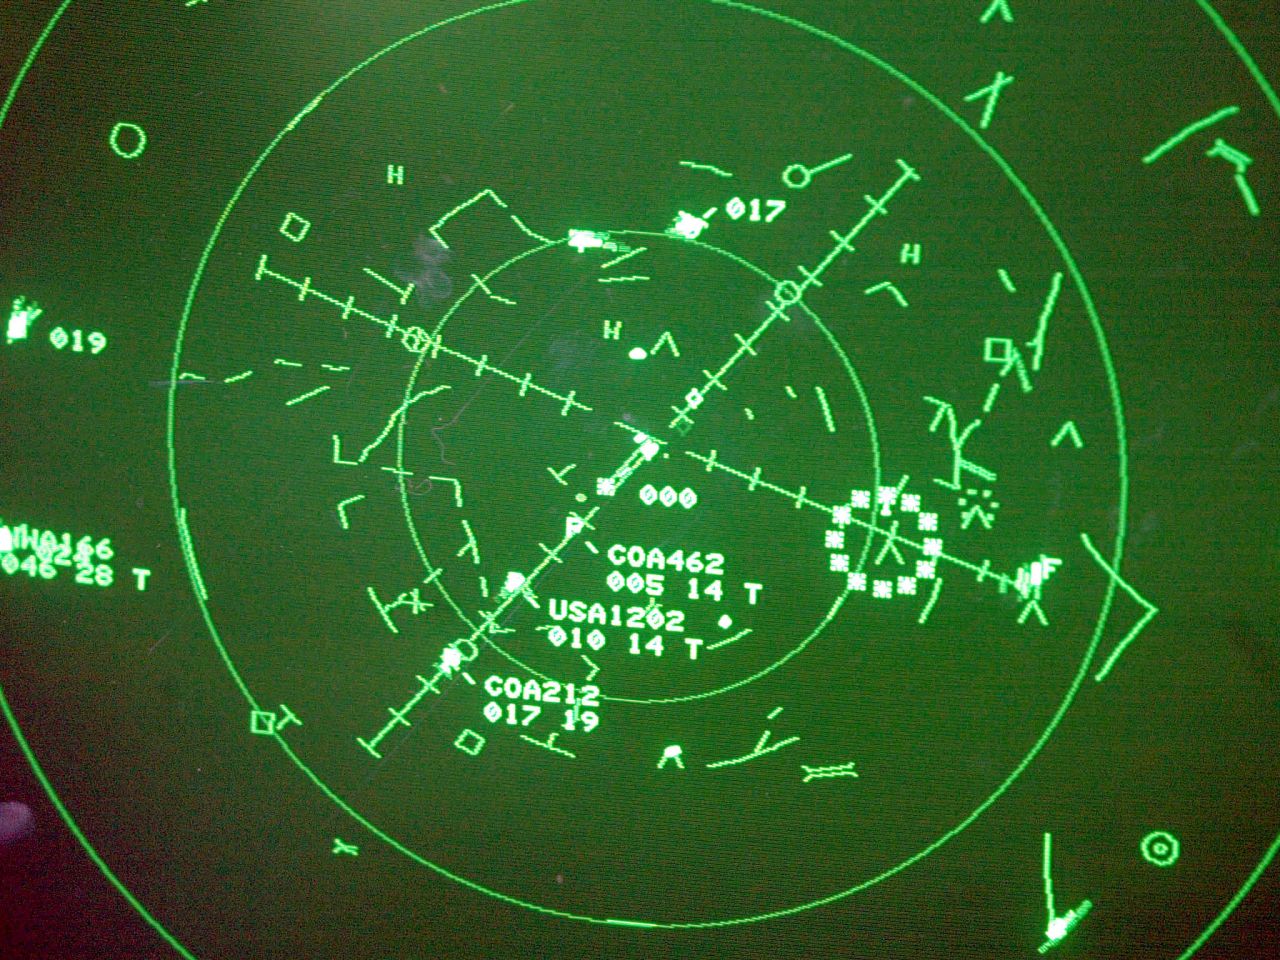 Many products and technologies that are now commonplace in civilian life were first created for military purposes. Take radar, for example, which was developed by several nations before and during World War II. The name Radar (RAdio Detection And Ranging) was coined by the U.S. Navy and is used in a variety of civilian settings, perhaps most commonly in air traffic control.